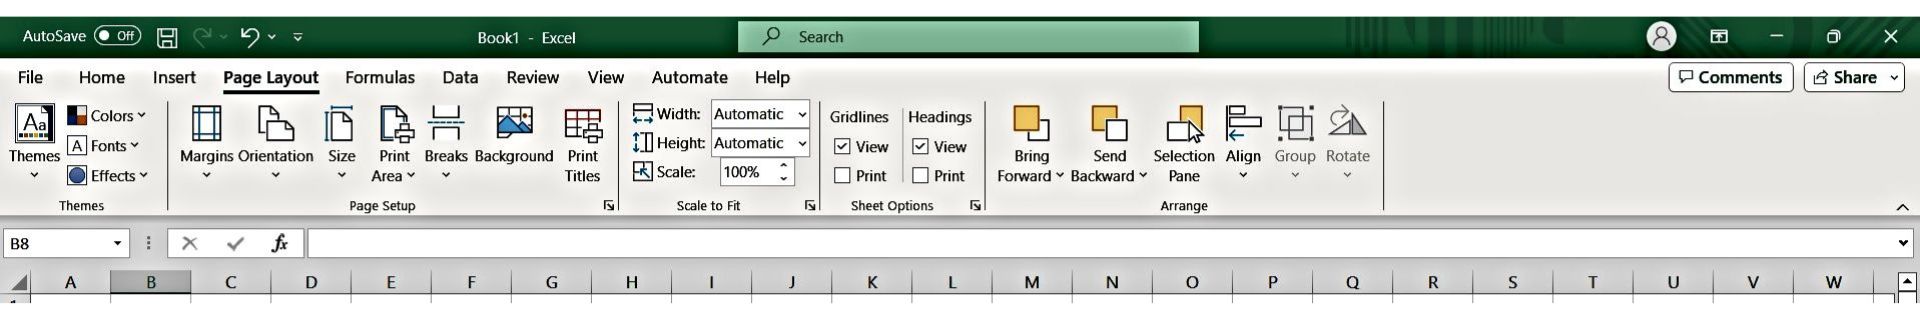 Page Layout Ribbon Tabs - Excel Hippo